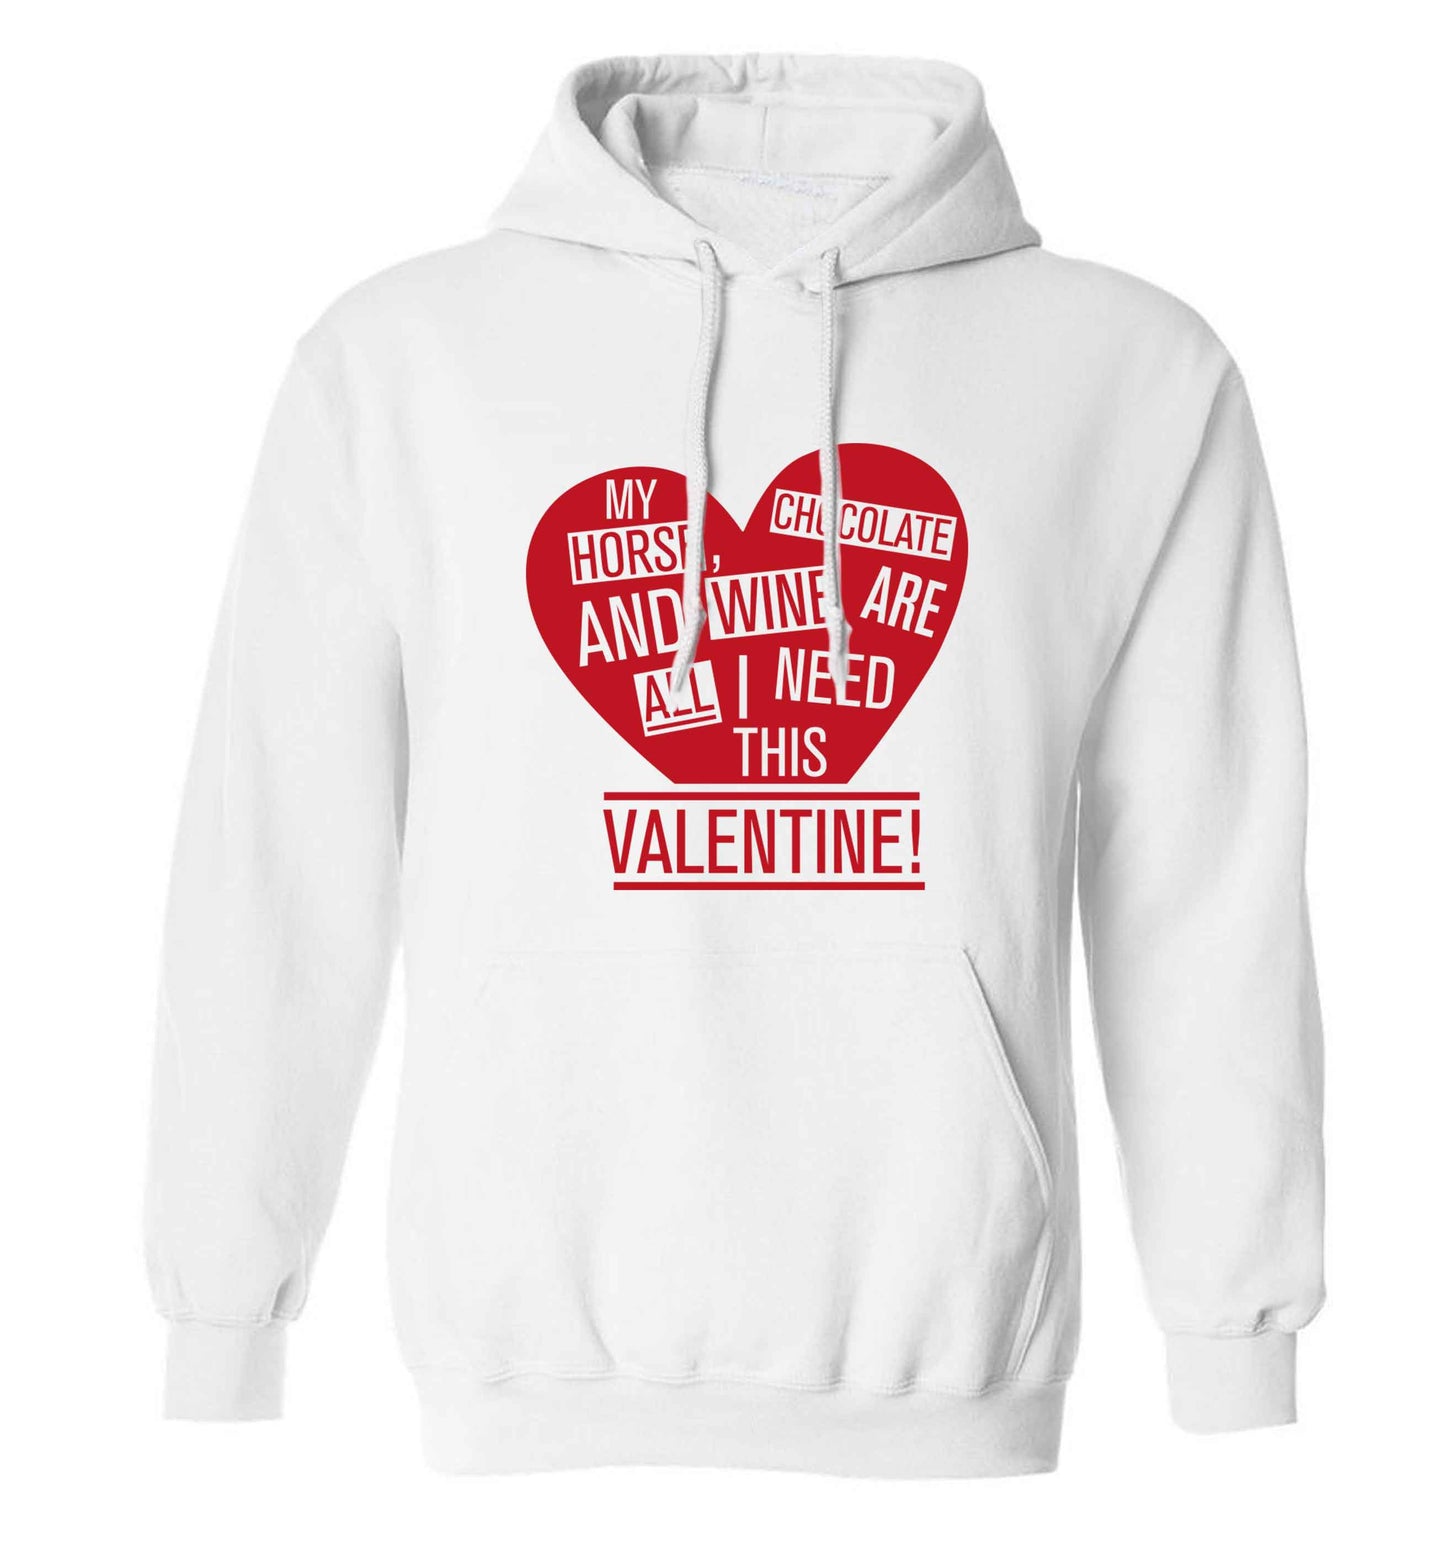 My horse chocolate and wine are all I need this valentine adults unisex white hoodie 2XL